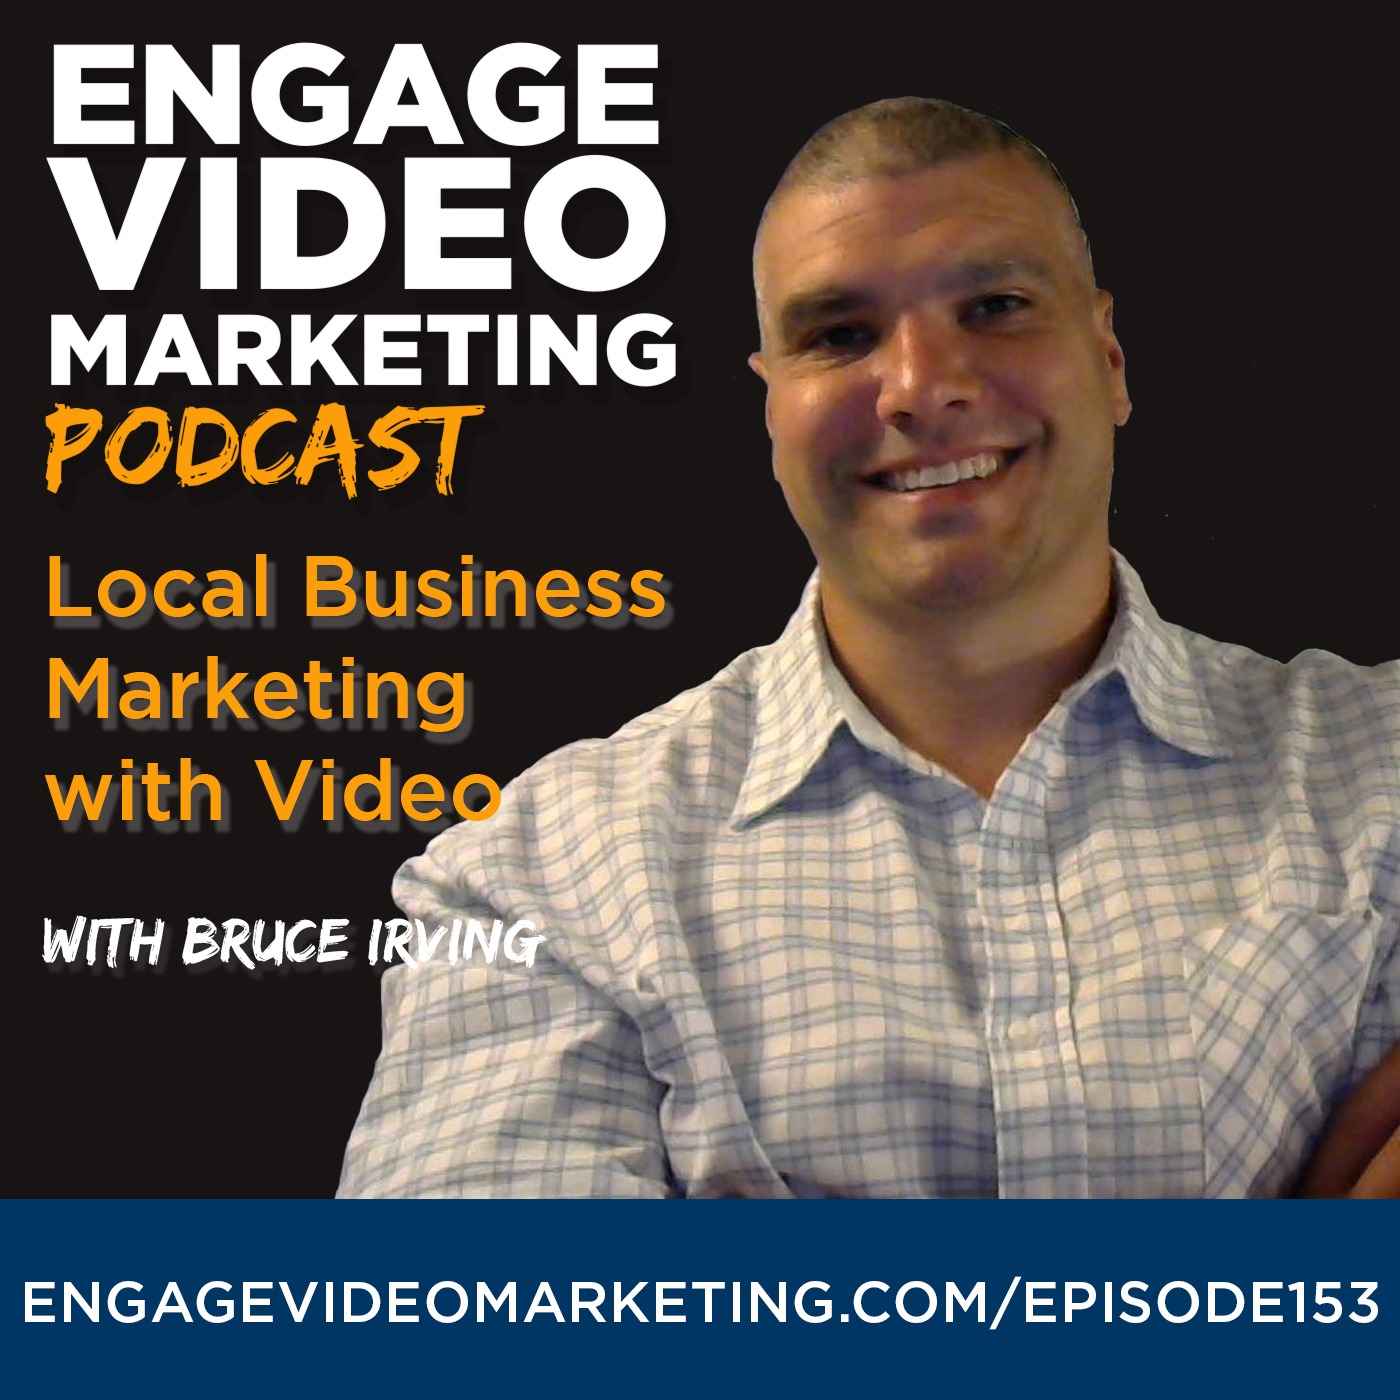 Local Business Marketing With Video with Bruce Irving